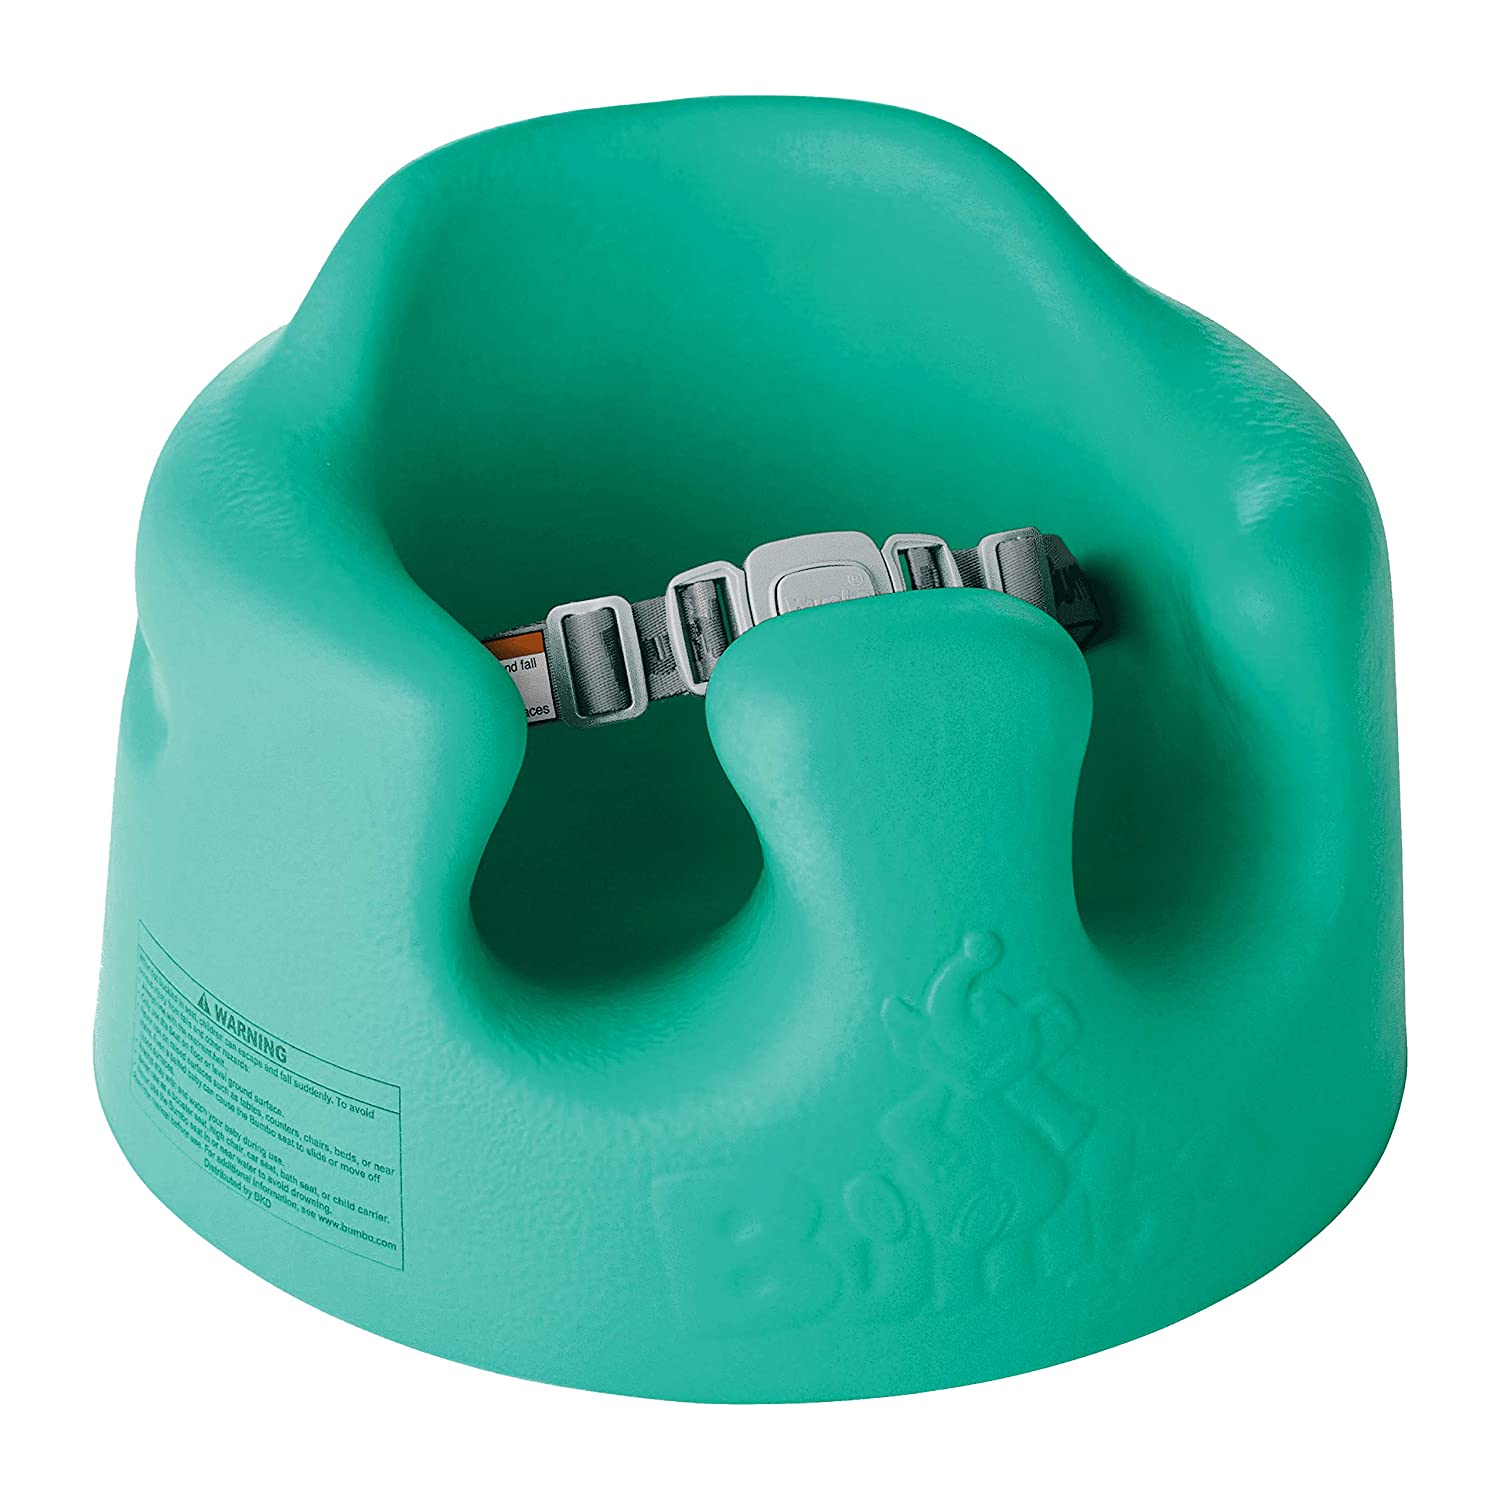 Bumbo Floor Seat, Ultimate Sitting Support, -- ANB Baby